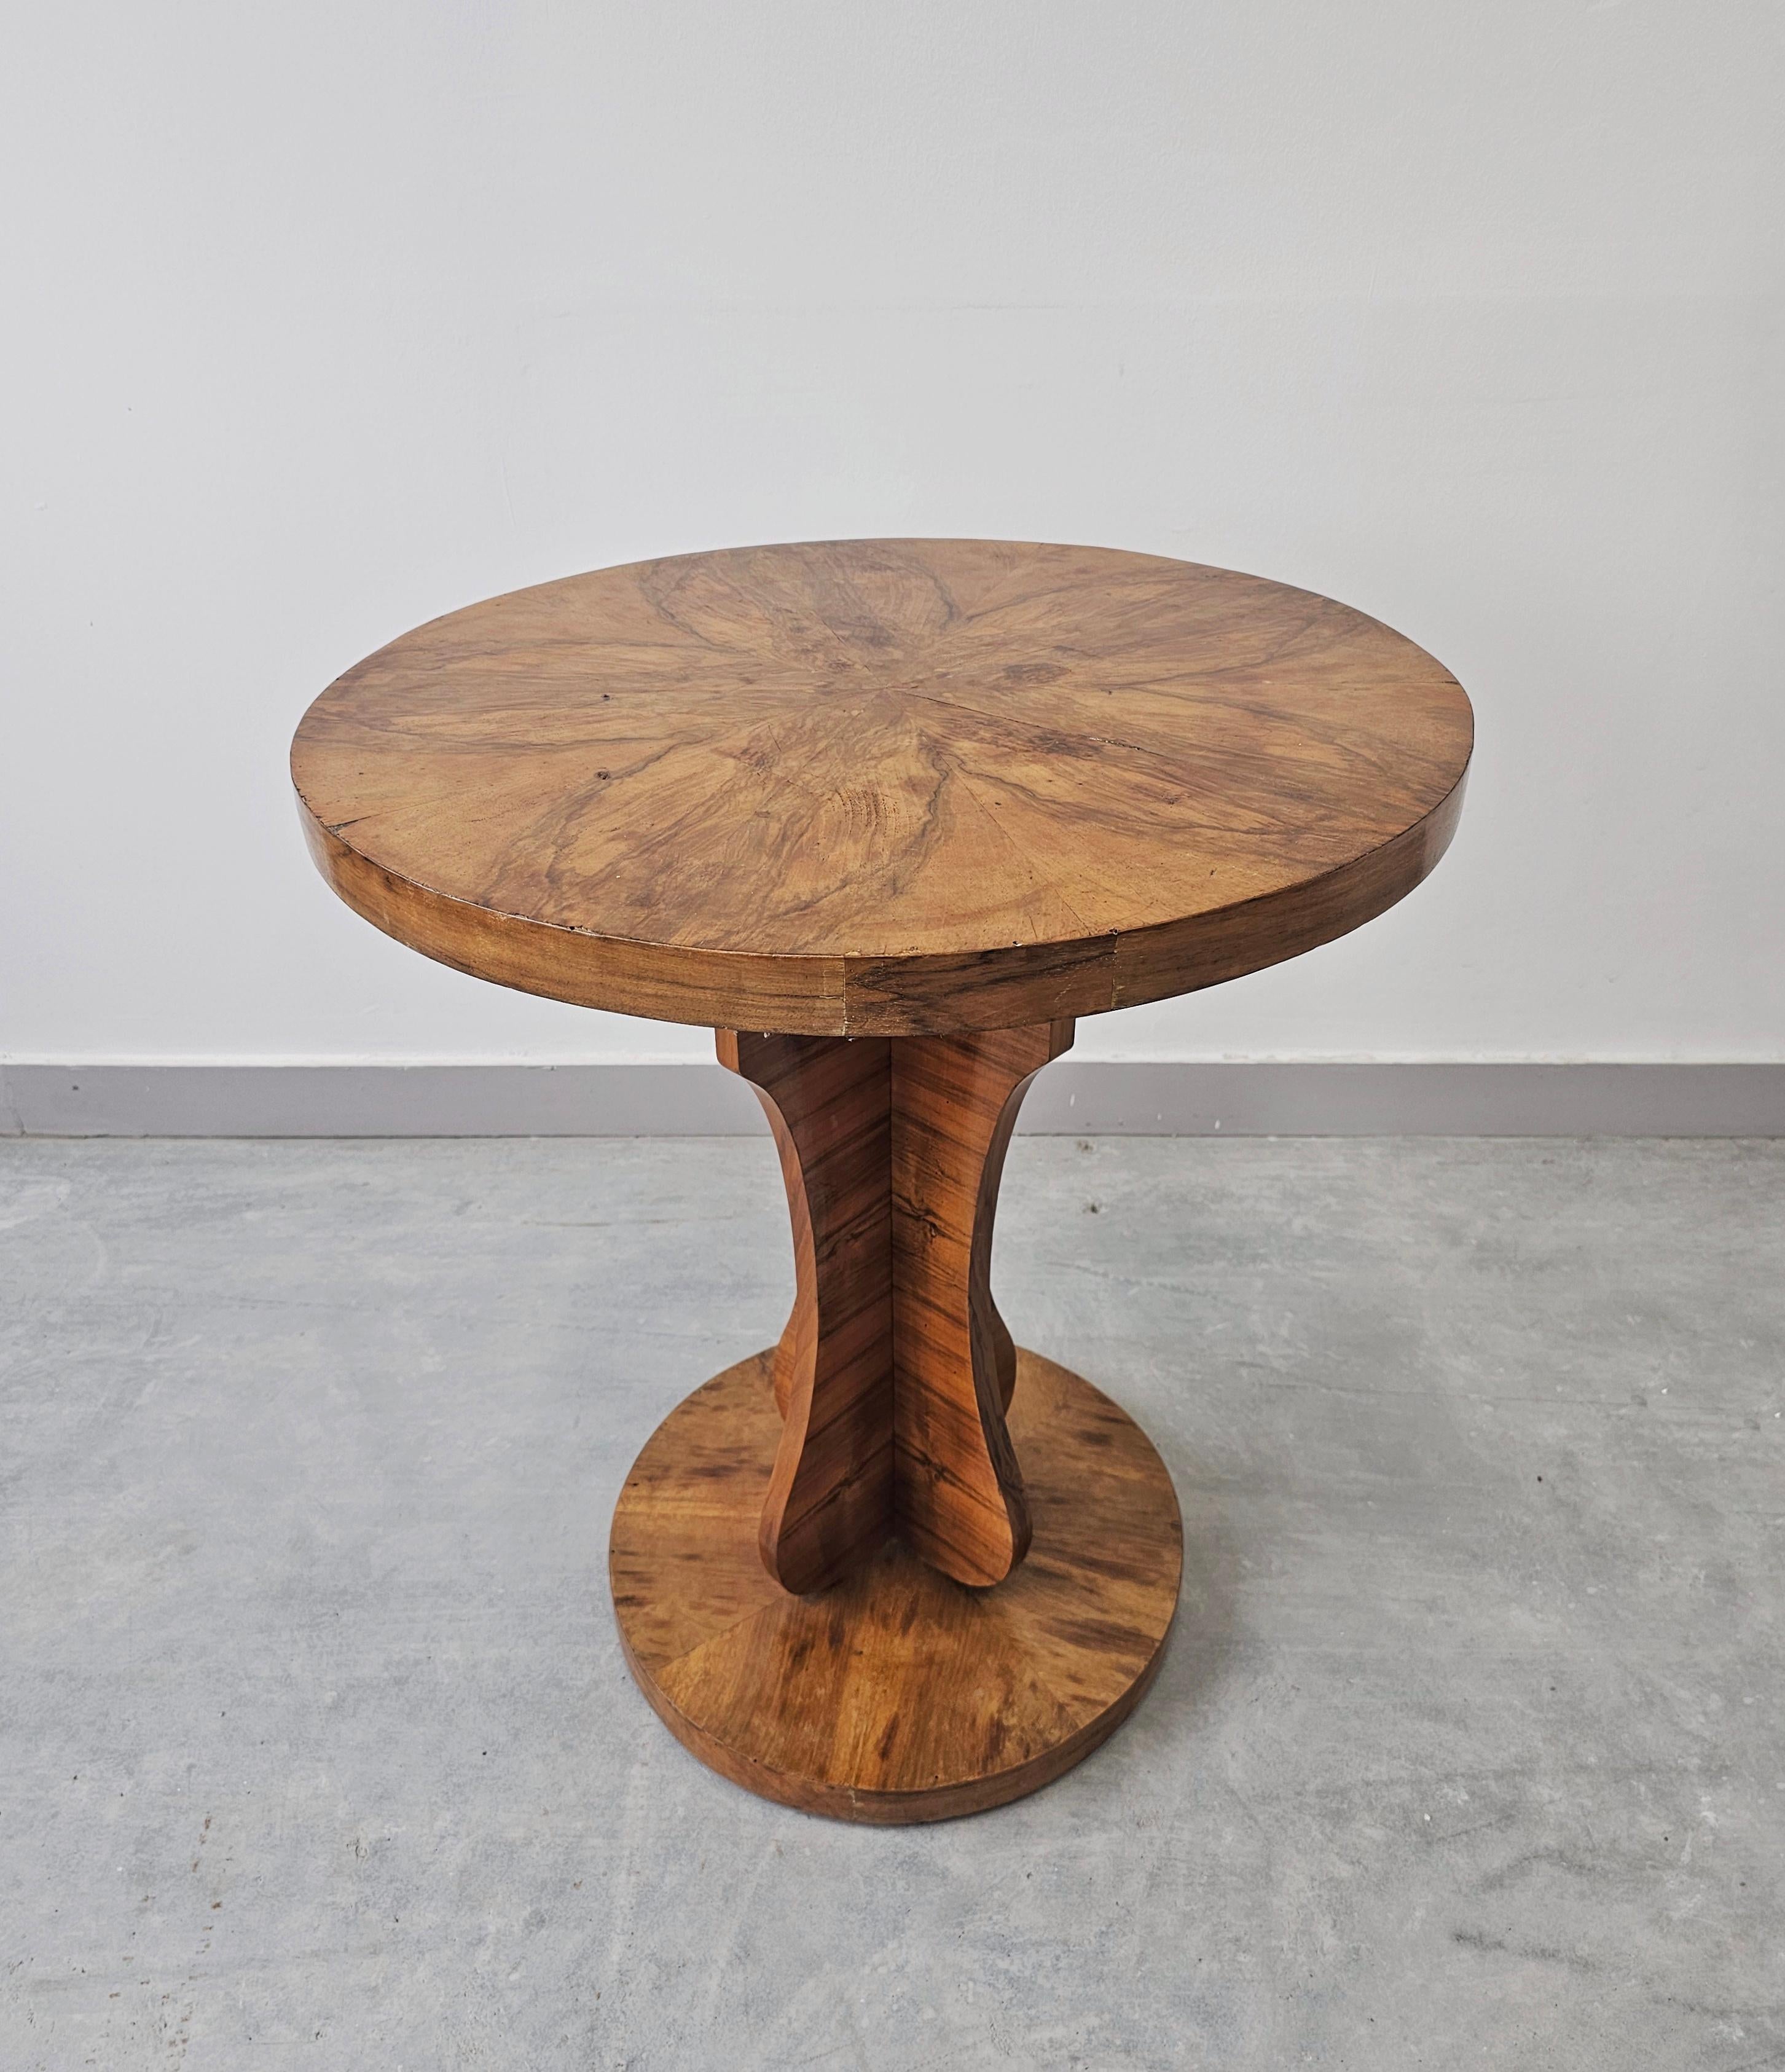 In this listing you will find a gorgeous Art Deco table which could be use in various occasions and purposes - as a central table in a hallway for large vase or pot with flowers, as a tiny dining table, or as a decorative side table. It features a